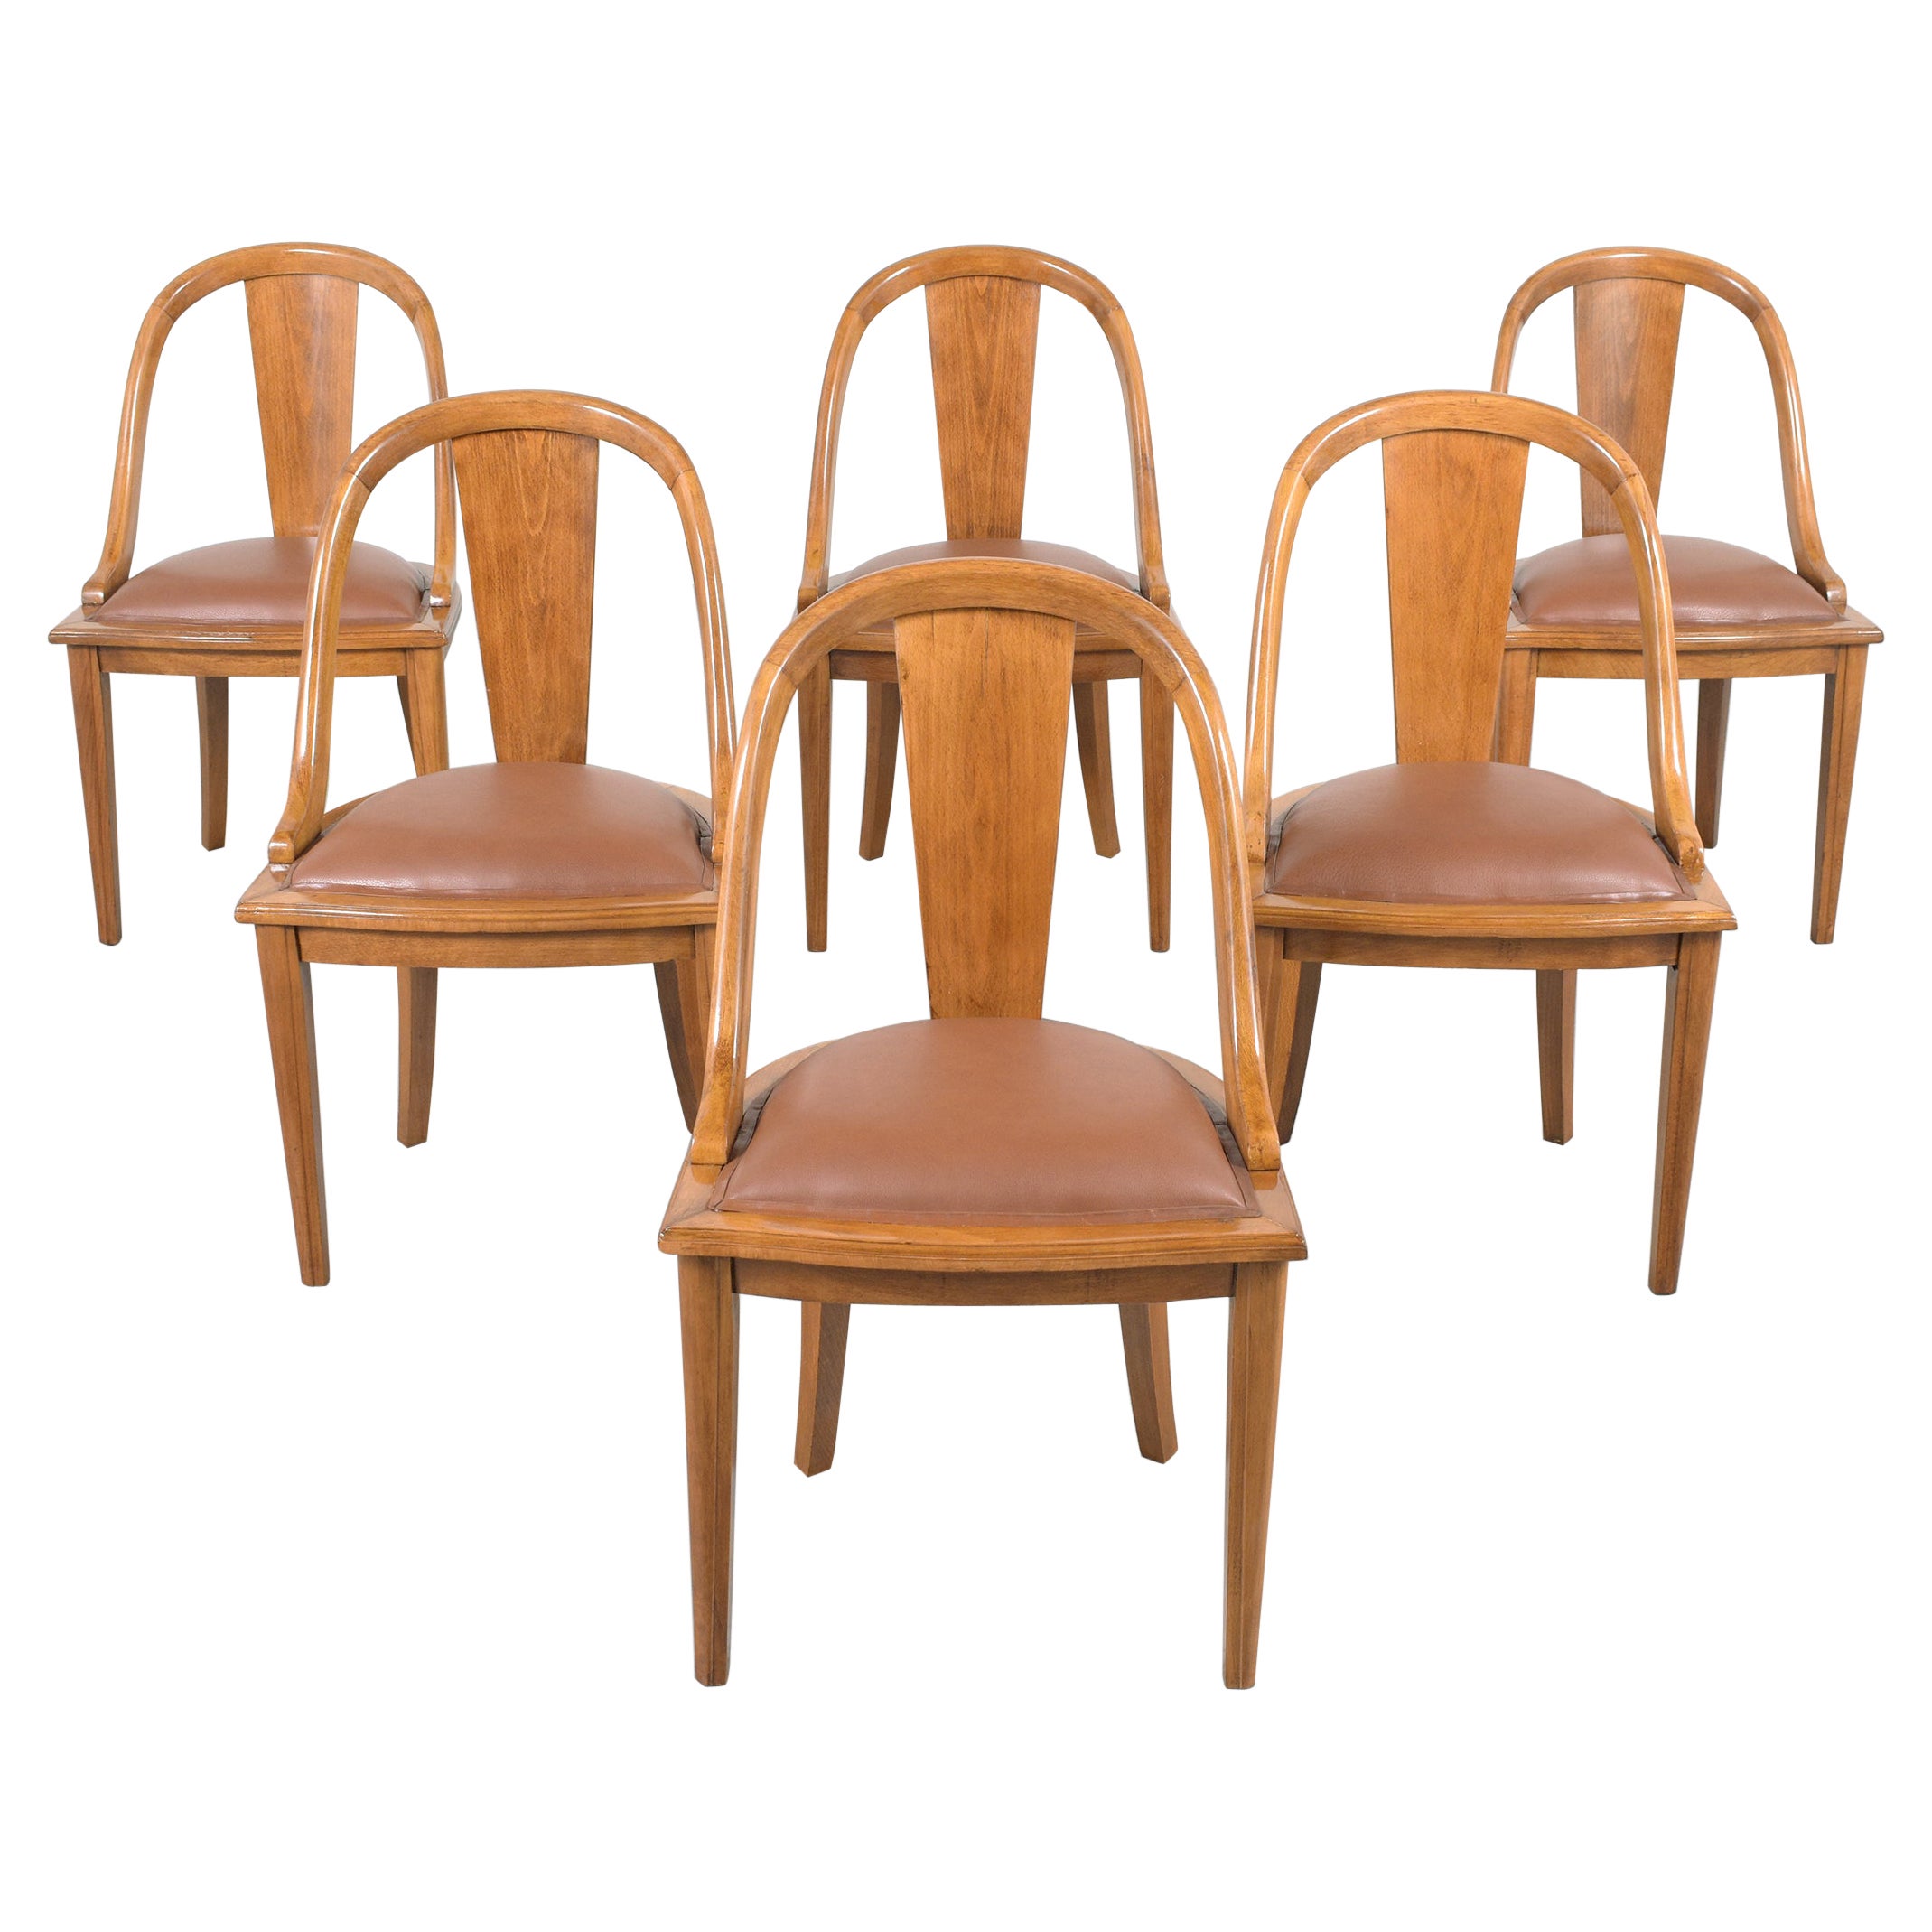 1950s French Art Deco Walnut Dining Chairs